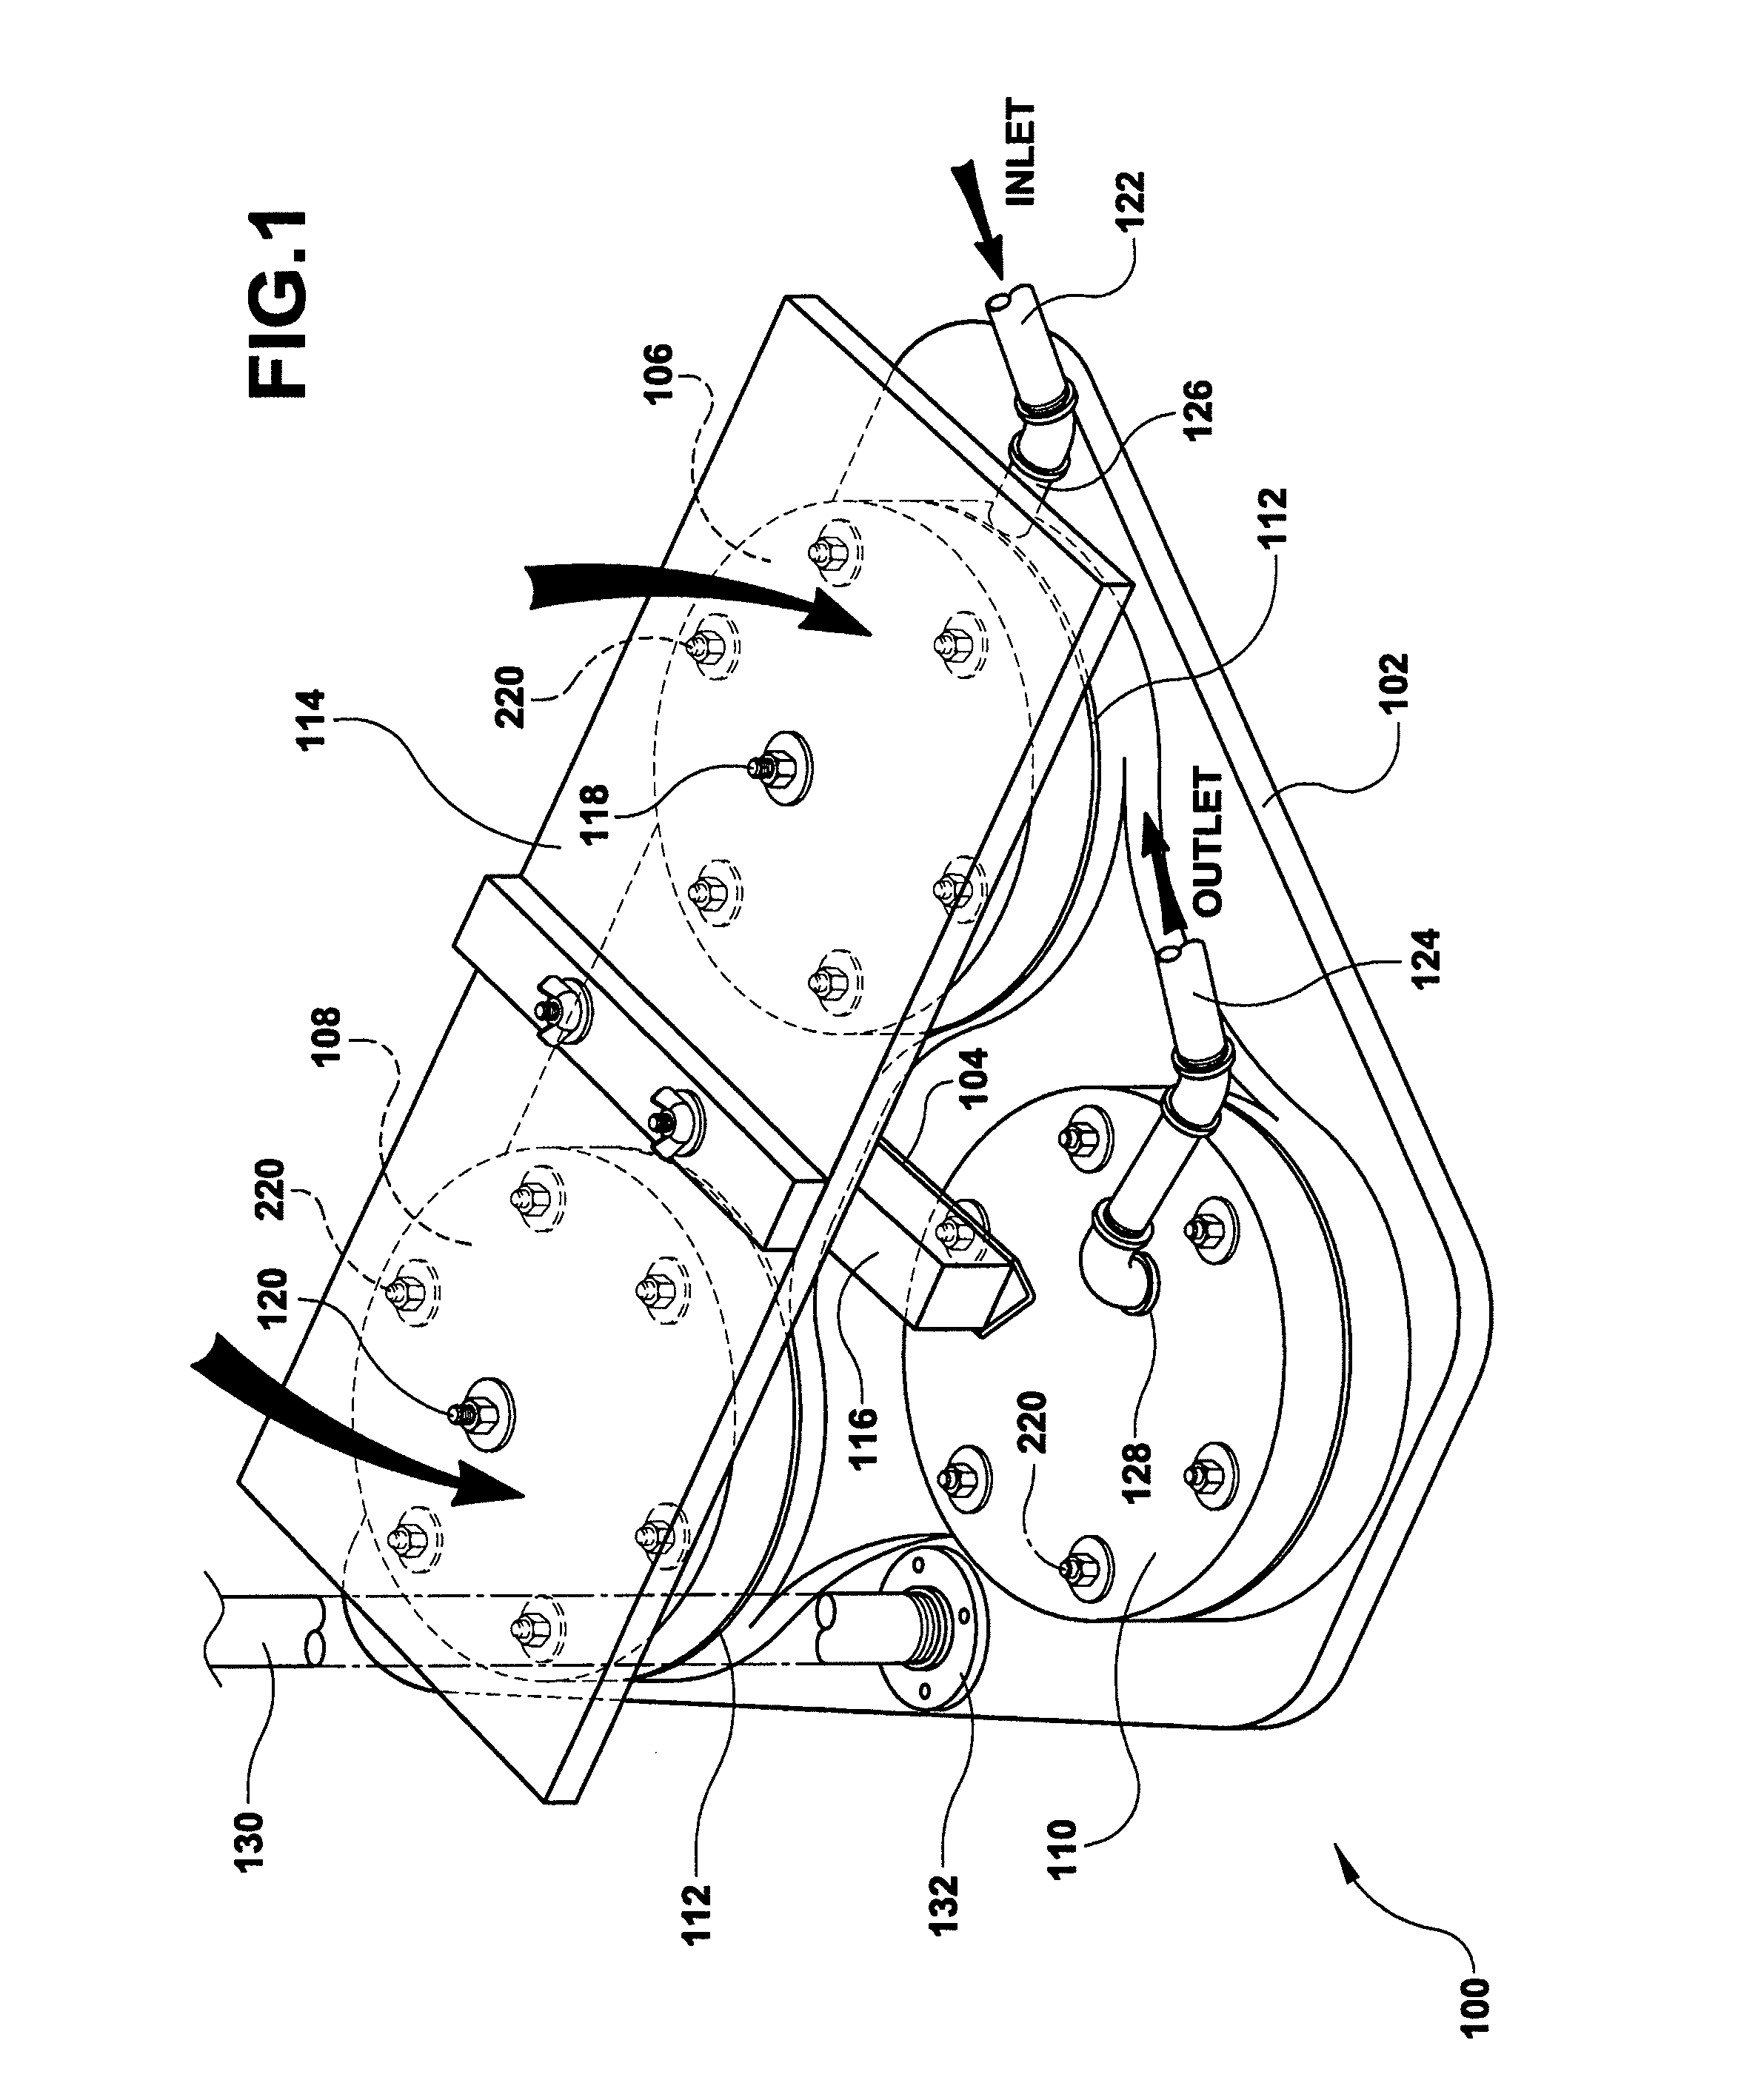 Water pump for use in irrigation and for other purposes